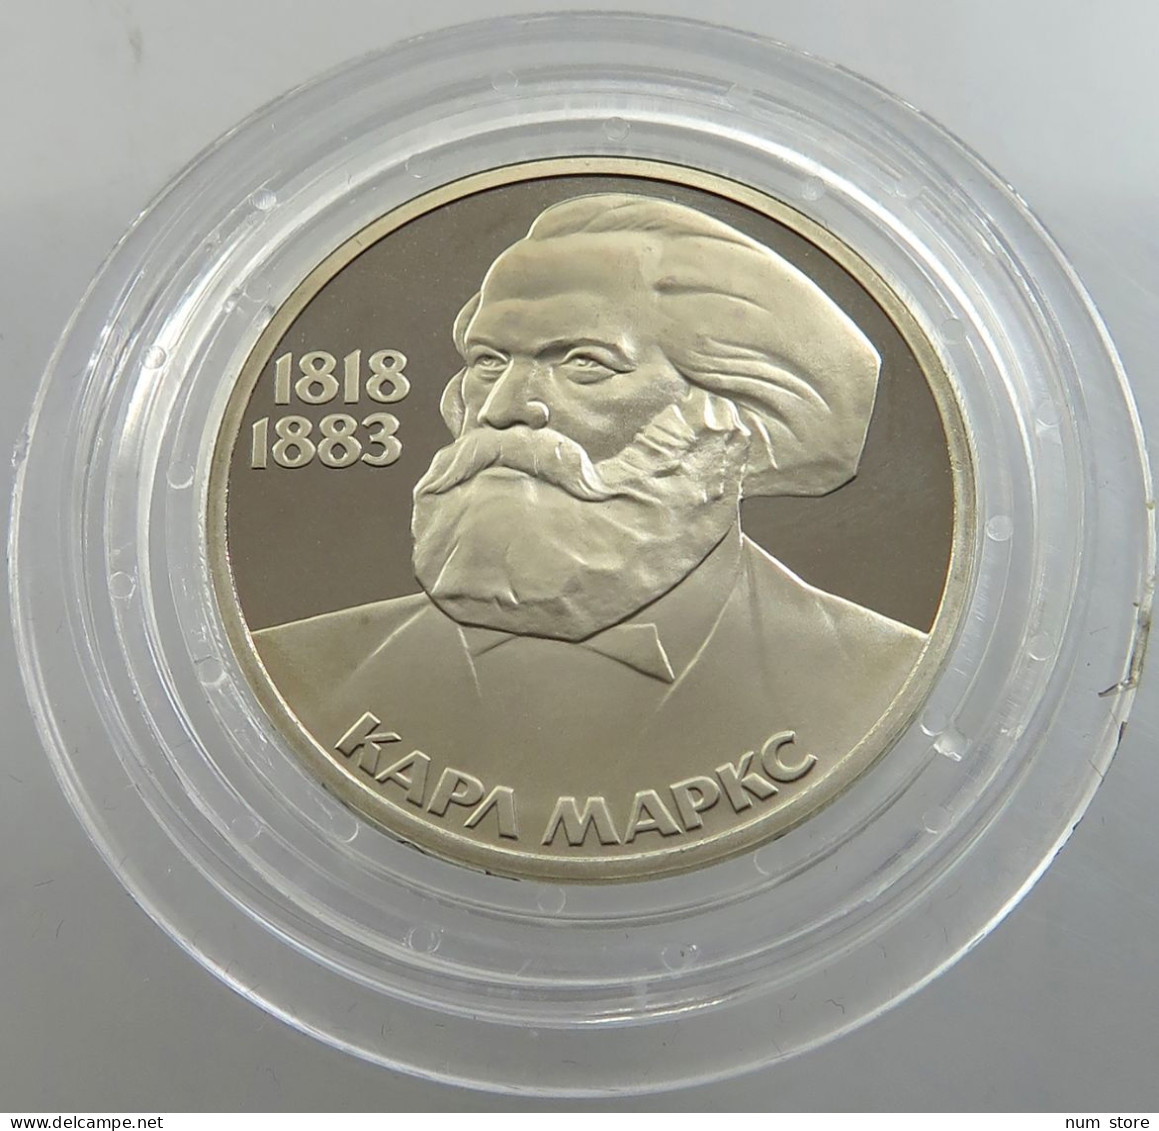 RUSSIA USSR 1 ROUBLE 1983 1988 MARX PROOF #sm14 0333 - Rusia